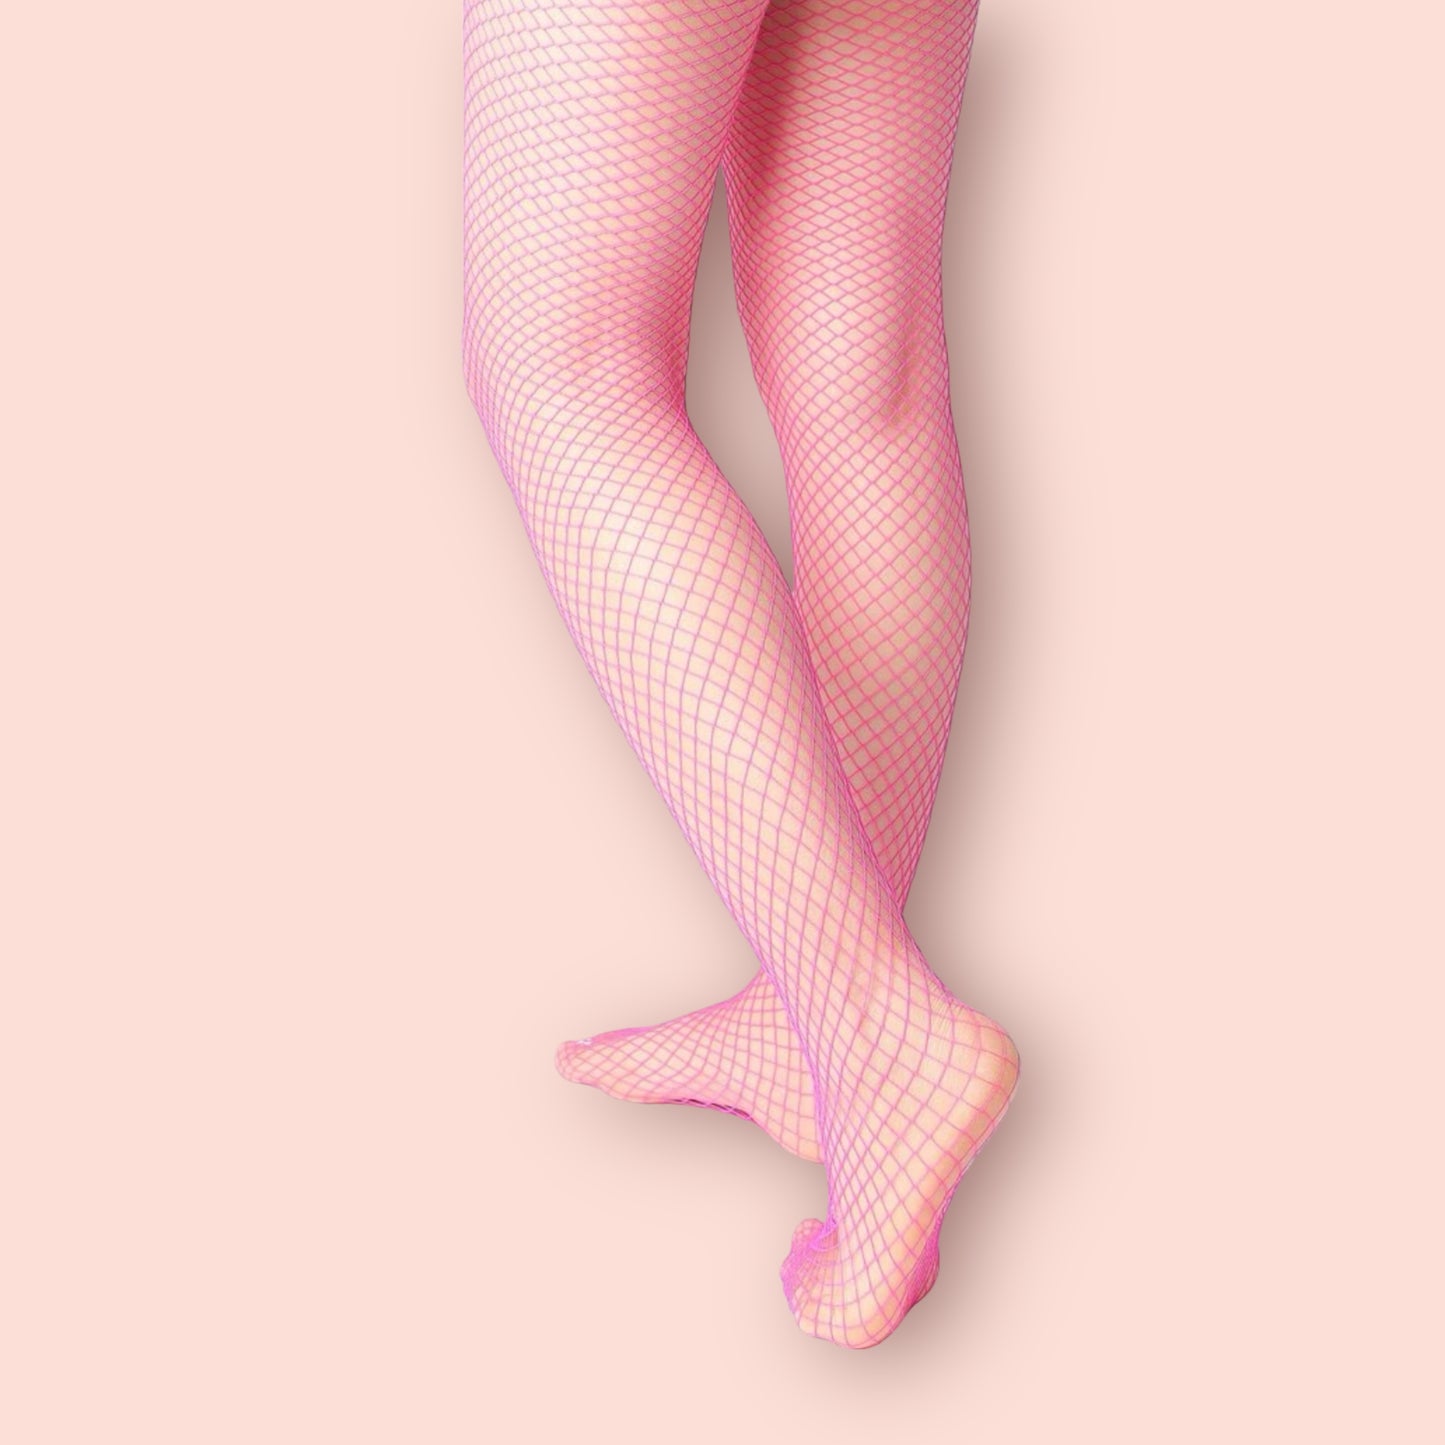 Highly elastic hot pink fishnet tights